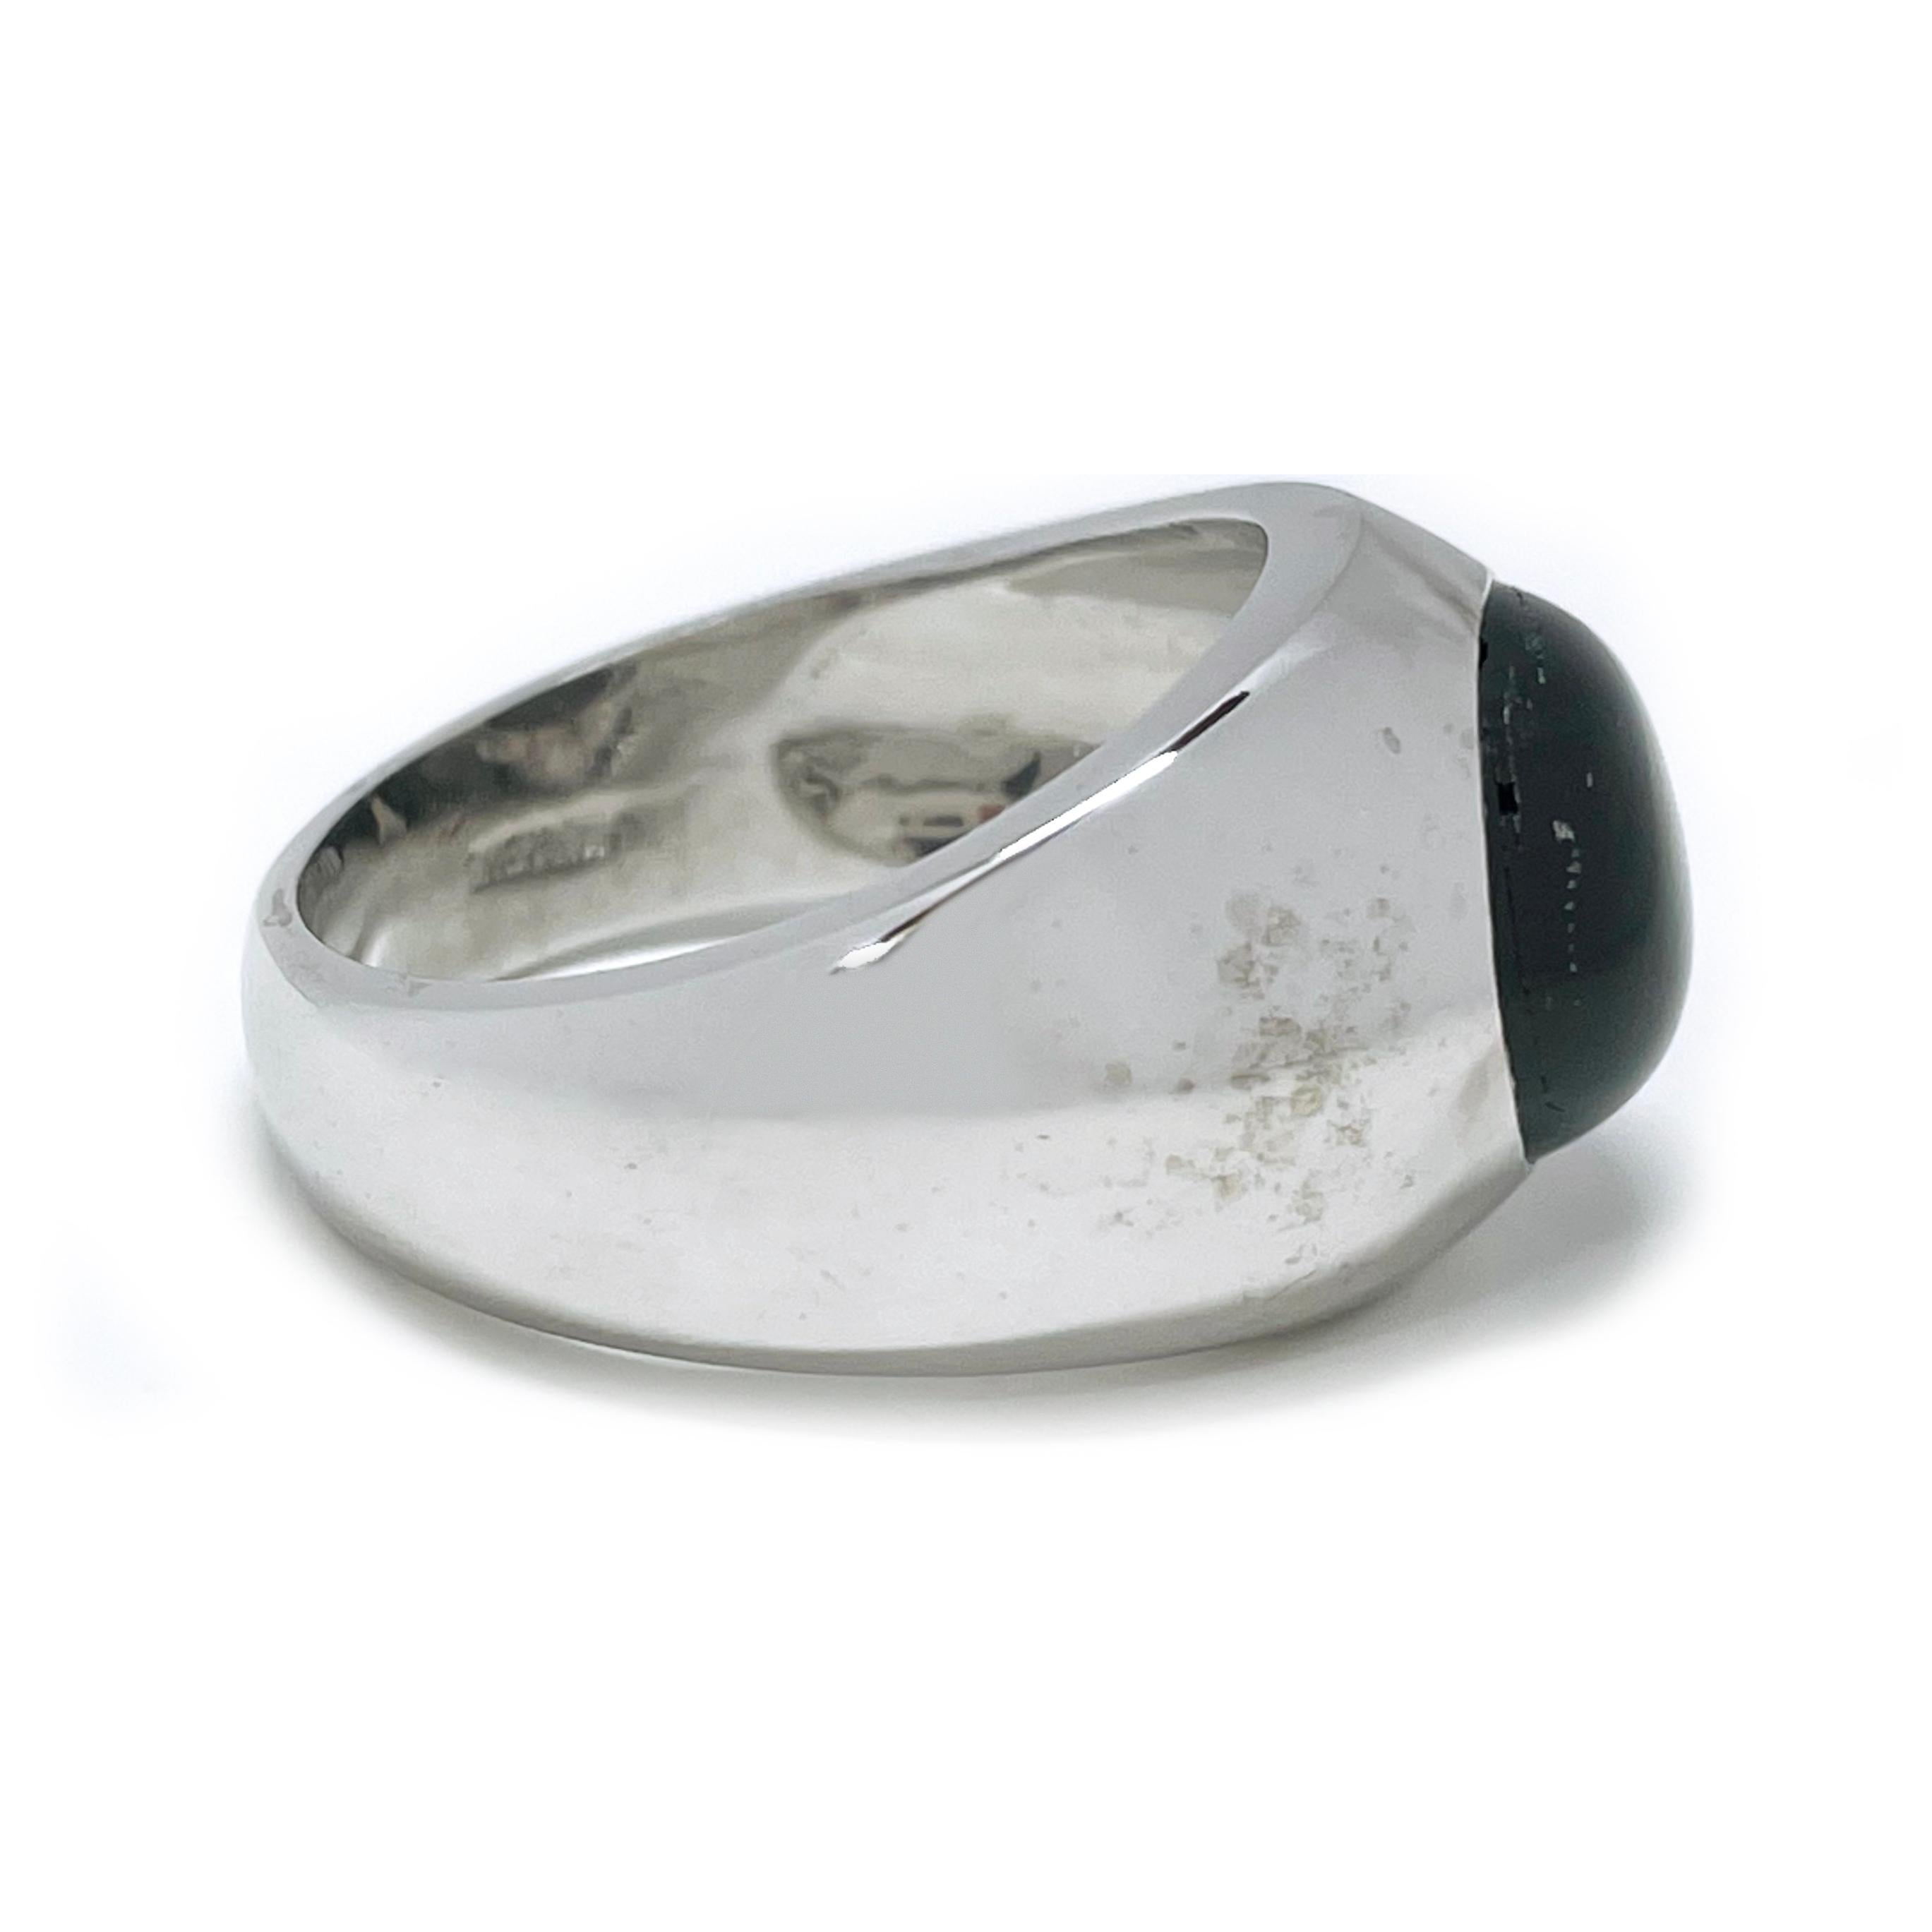 18 Karat White Gold Black Star Sapphire Ring. The ring features a bezel-set oval black star sapphire. The six-star sapphire has great presence with light. The sapphire measures 13.5 x 11.00mm and the ring size is 8 1/2. The ring has a smooth shiny